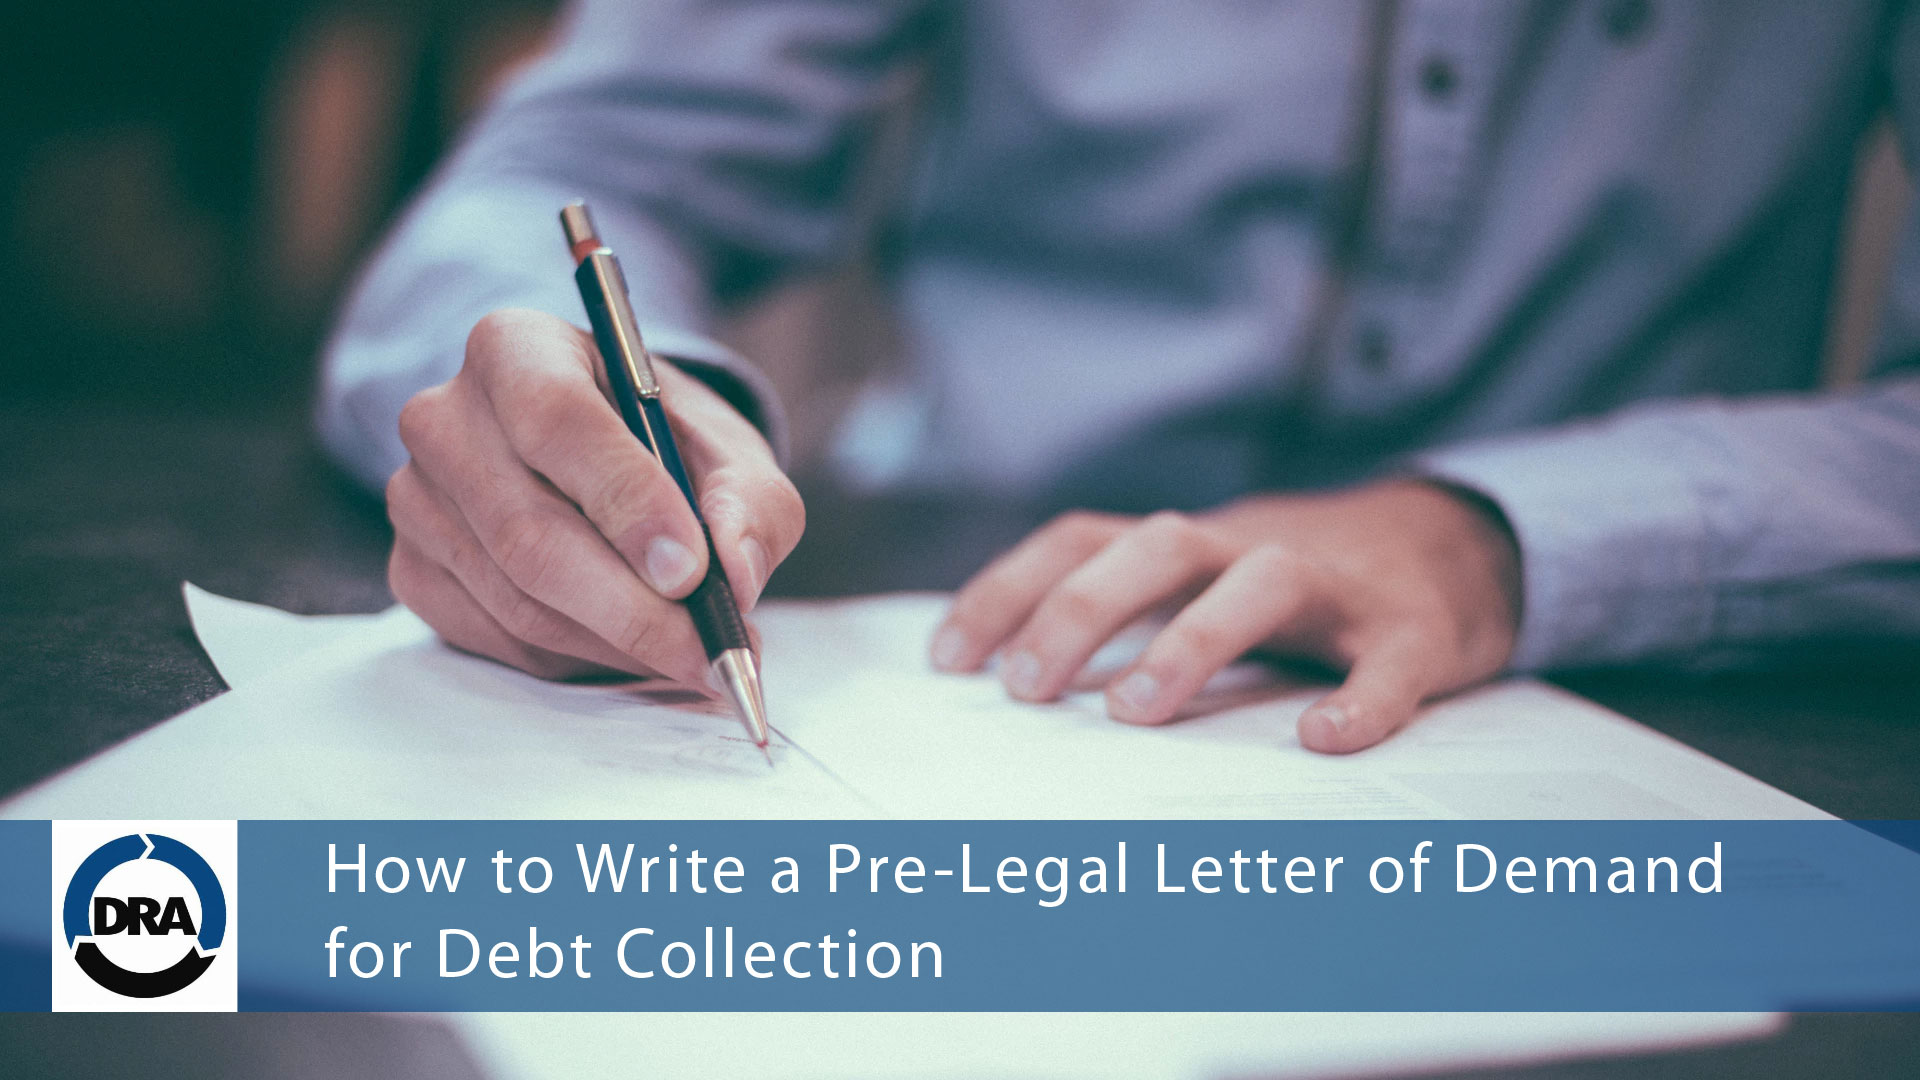 How to Write a Pre-Legal Letter of Demand for Debt Collection